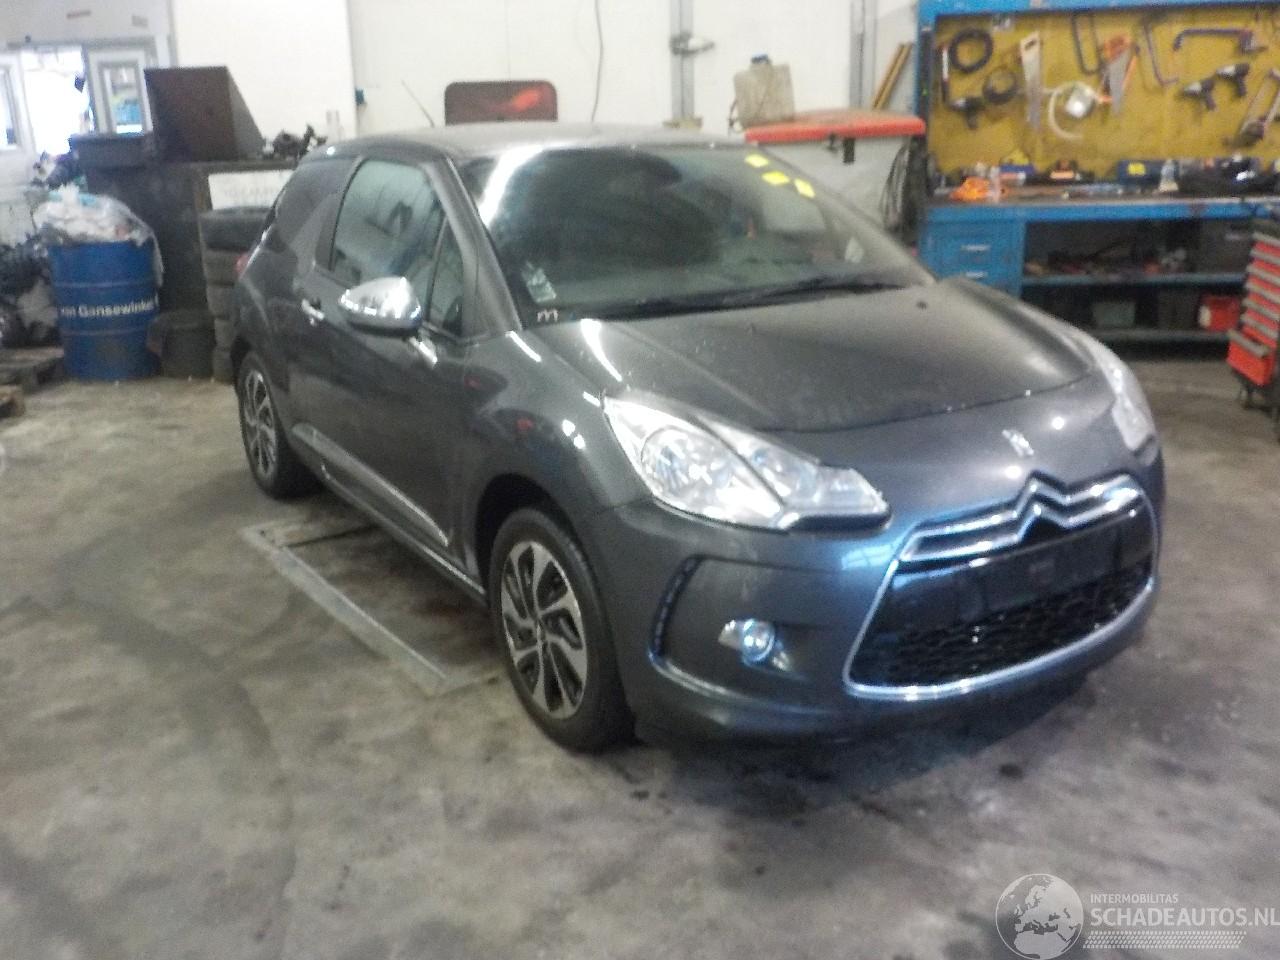 Citroën DS3 DS3 (SA) Hatchback 1.6 e-HDi (DV6DTED(9HP)) [68kW]  (11-2009/07-2015)